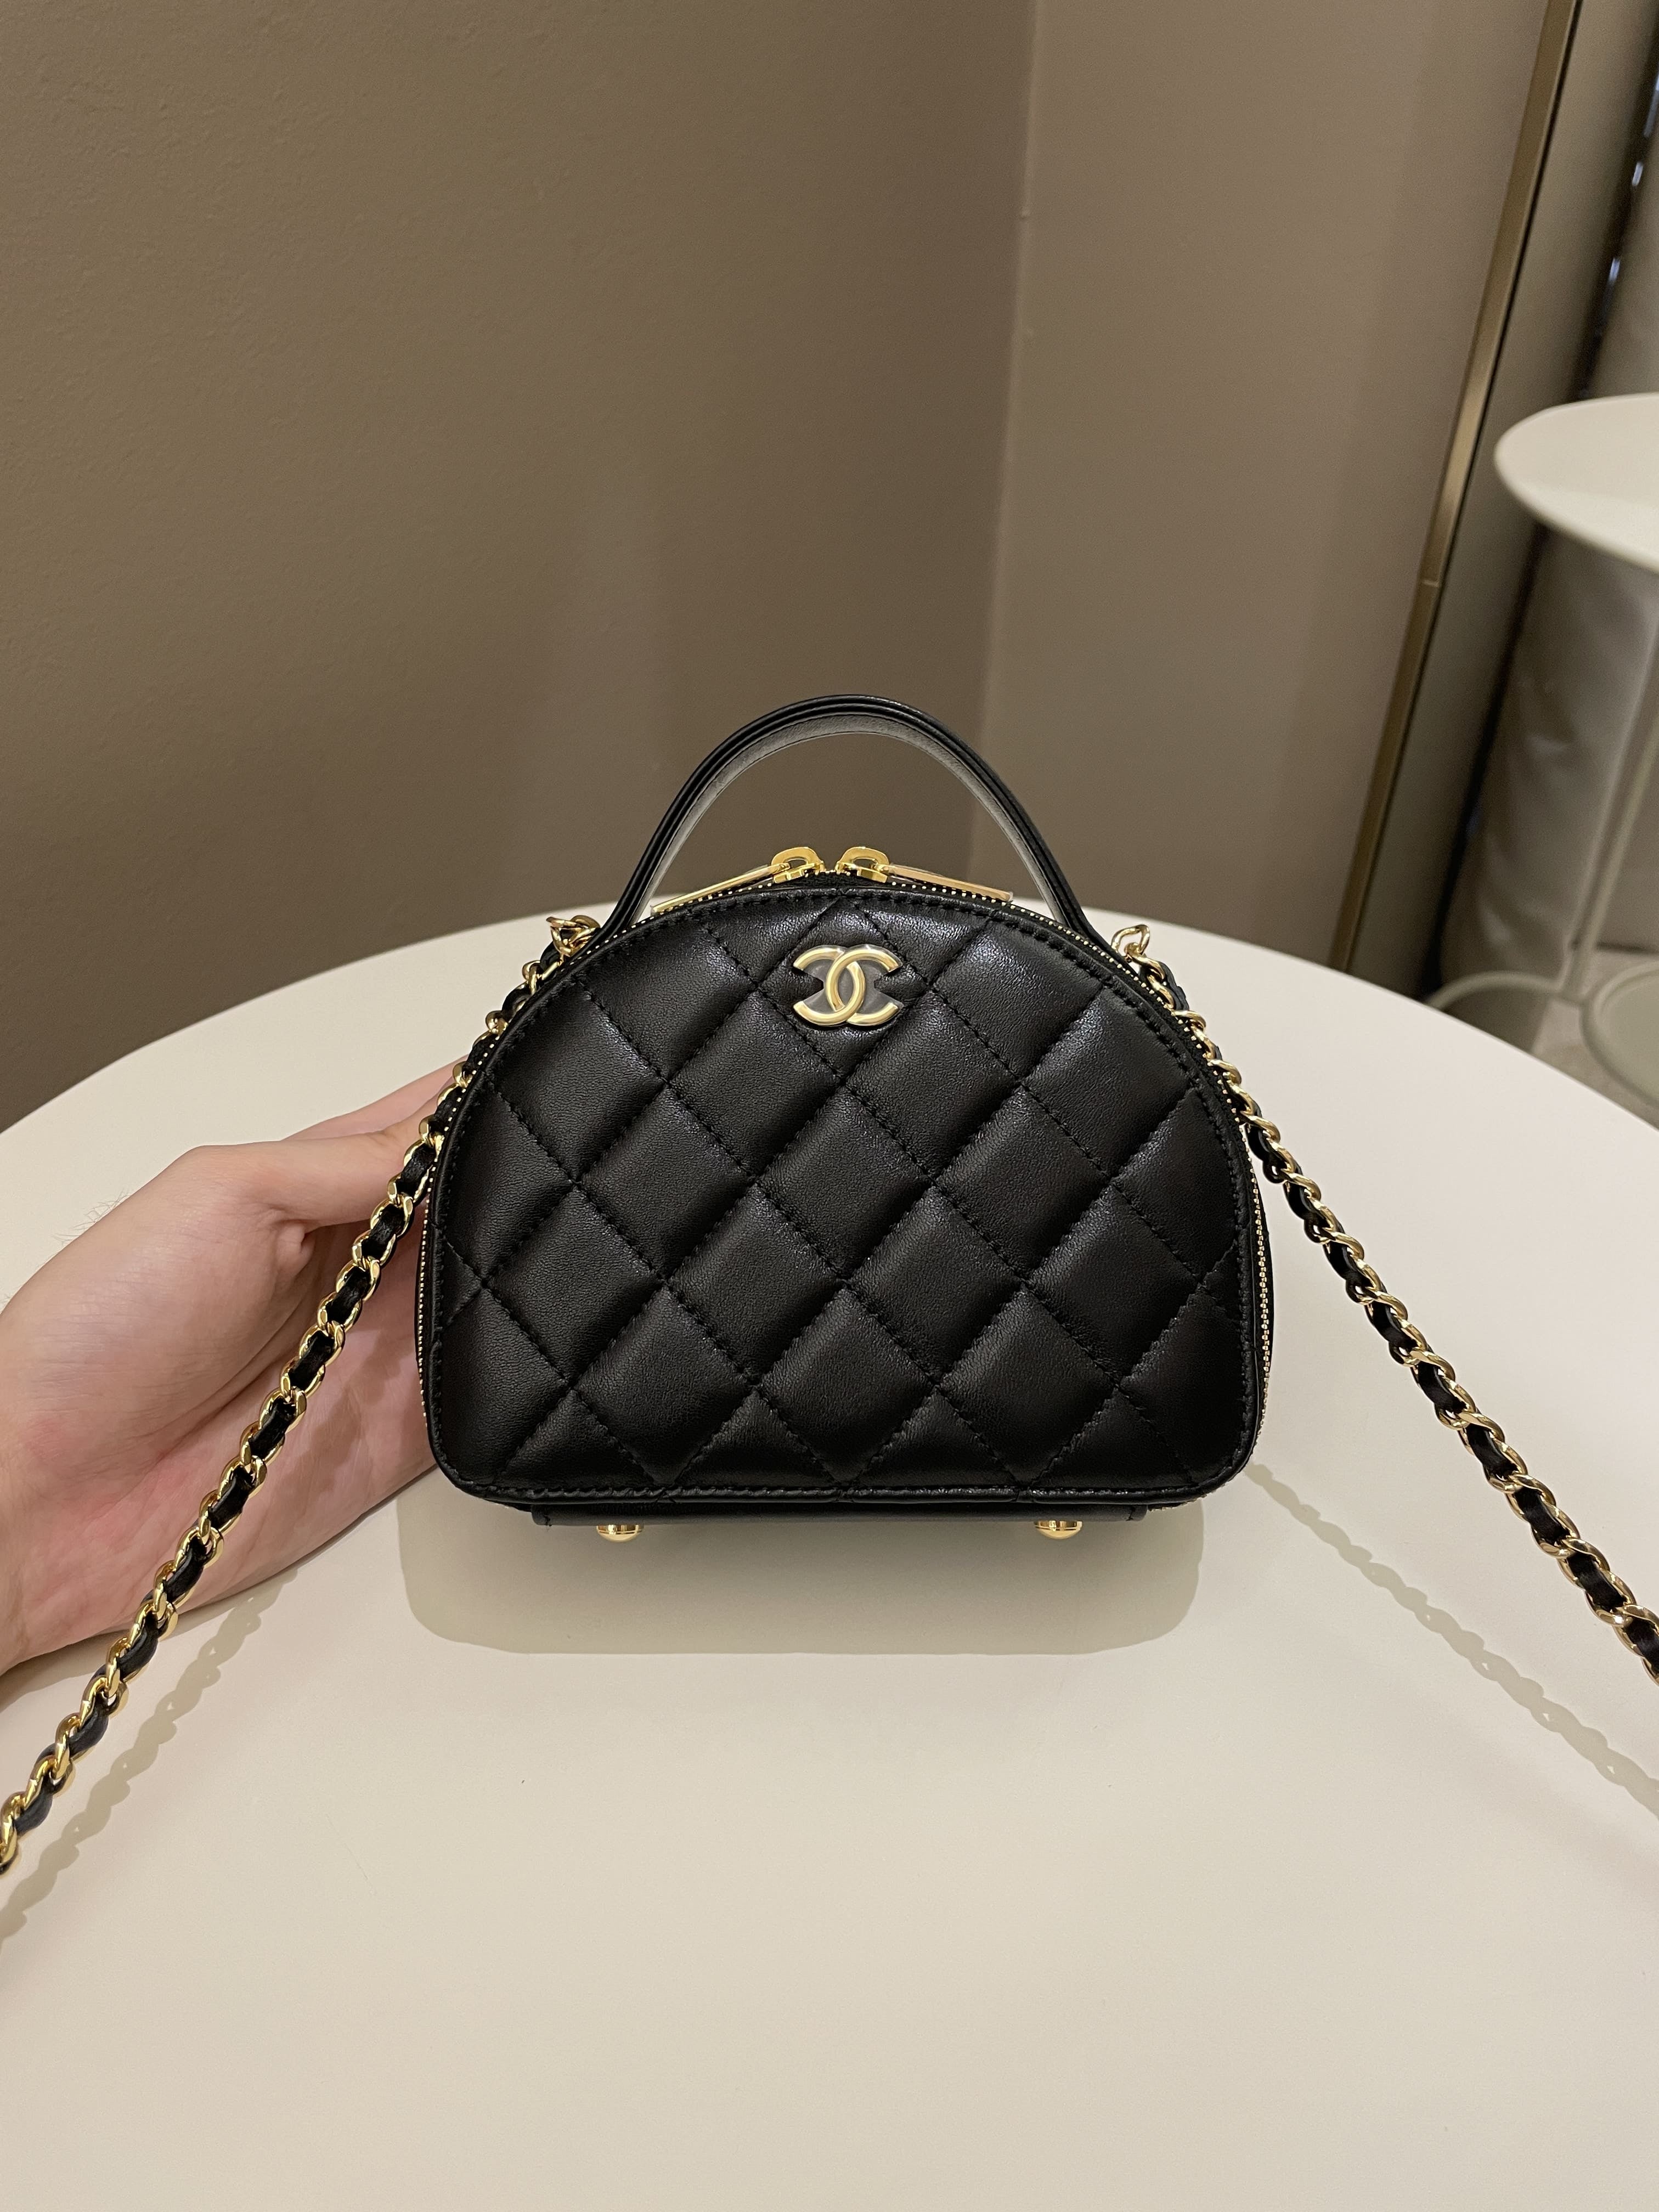 CHANEL, Bags, Brand New Authentic Chanel 23c Cc You Mini Flap Bag In  Caviar